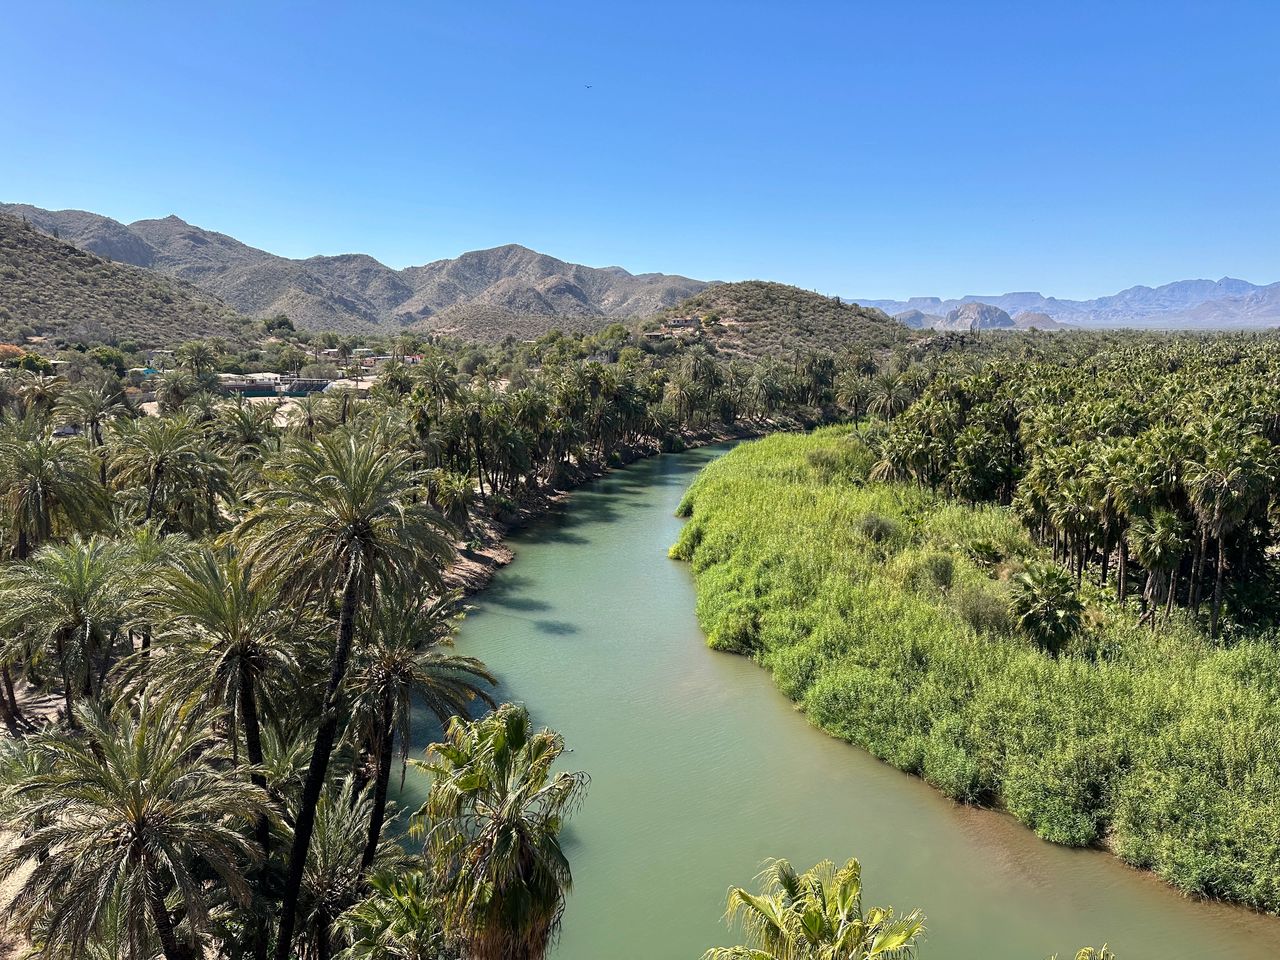 View of the river from the Mulege Mission.